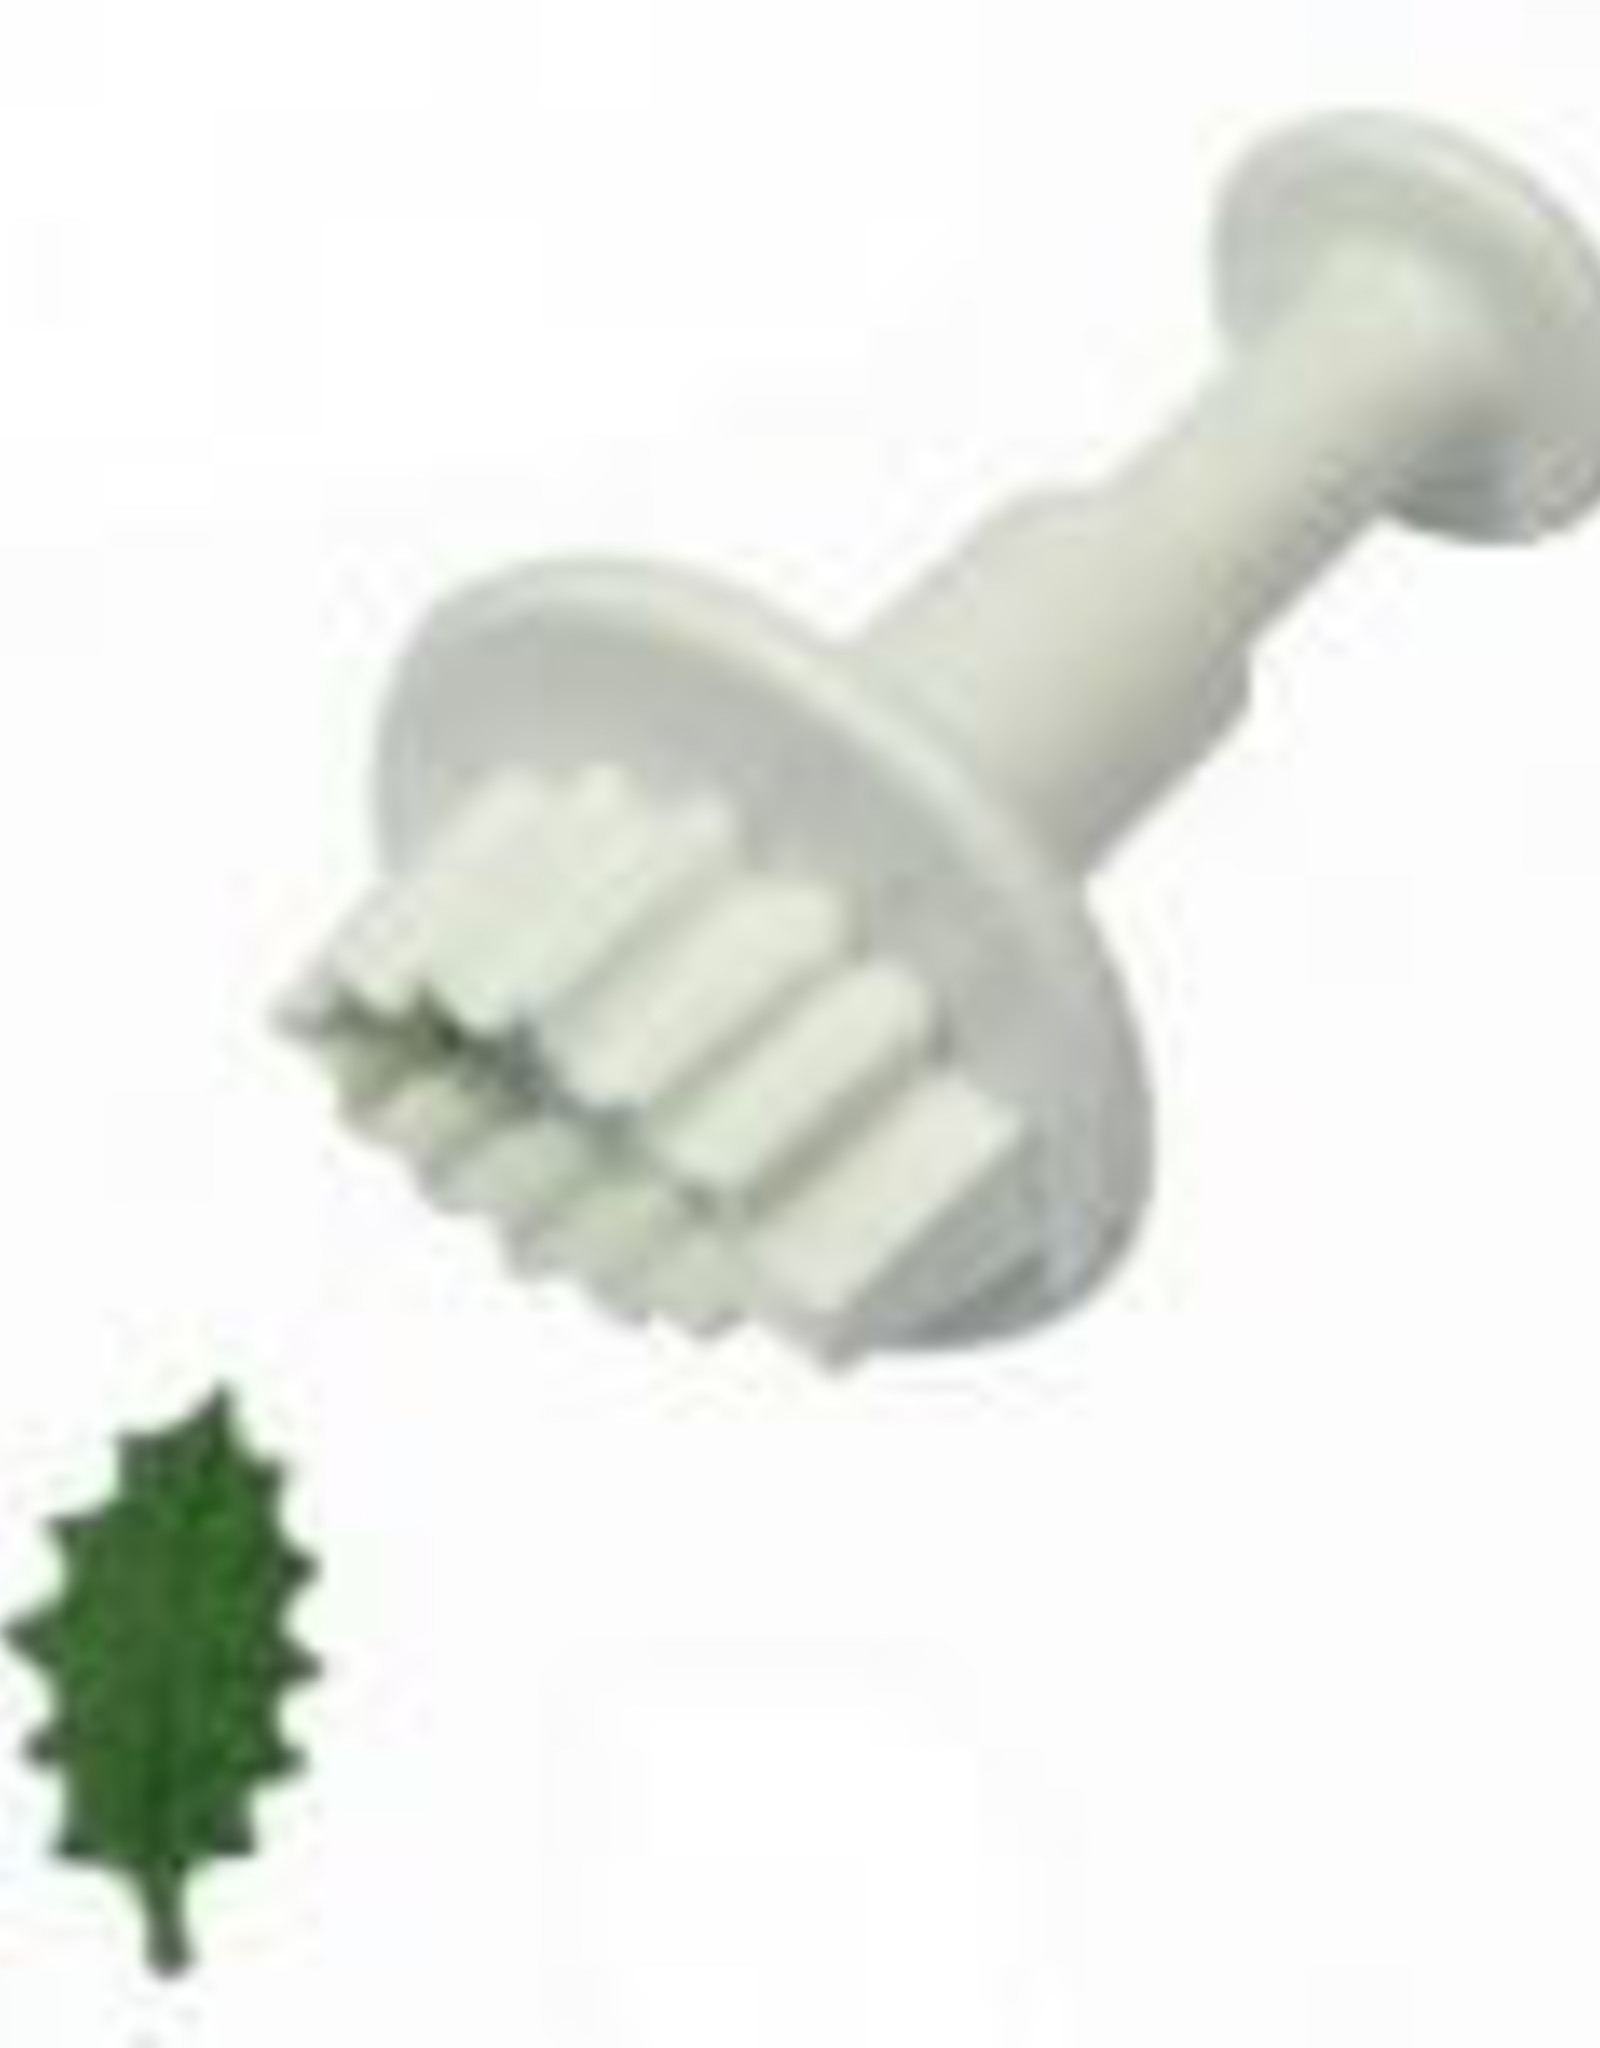 PME PME Veined Holly Leaf Plunger Cutter Small